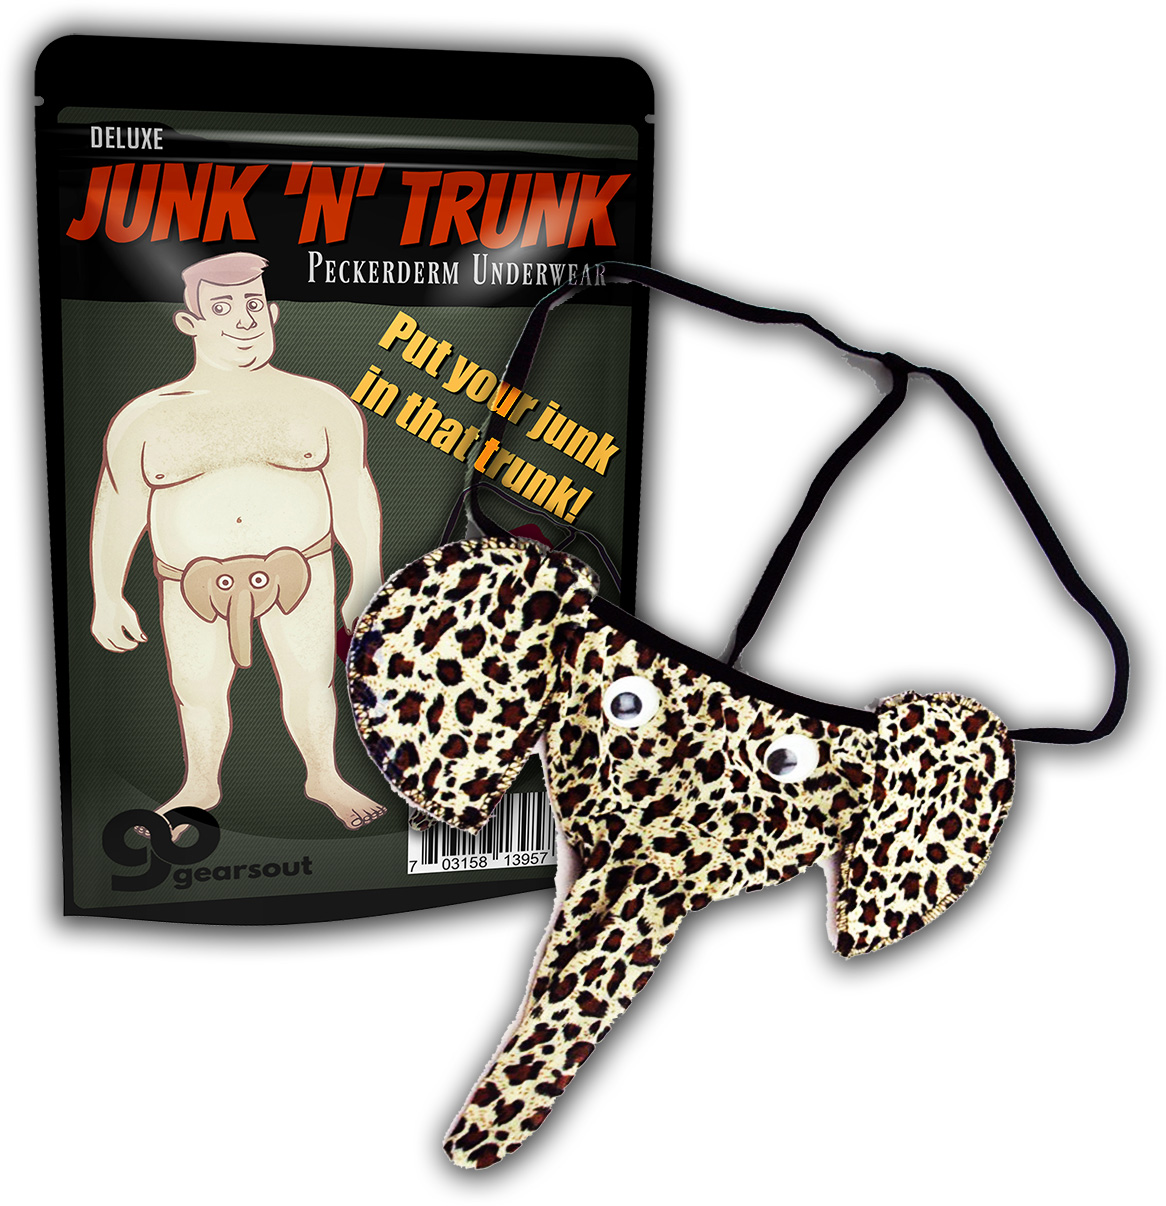 Deluxe Junk 'N' Trunk Peckerderm Underwear - $7.50 : , Unique  Gifts and Fun Products by FunSlurp